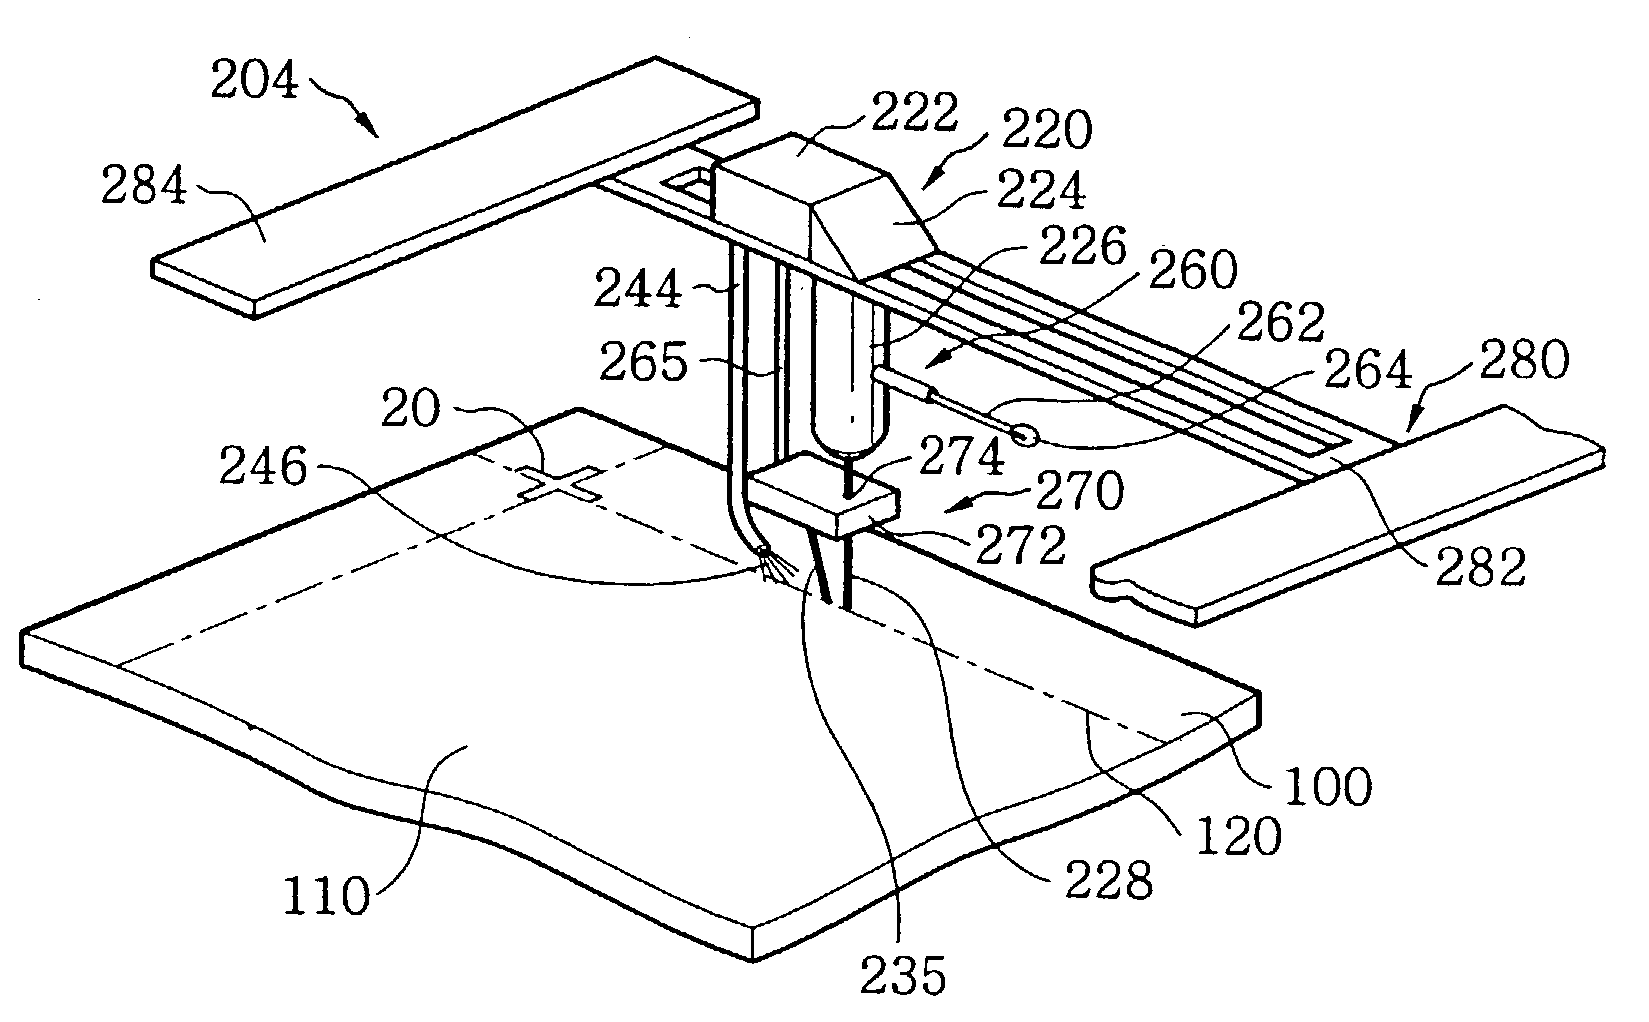 Laser cutting apparatus and method